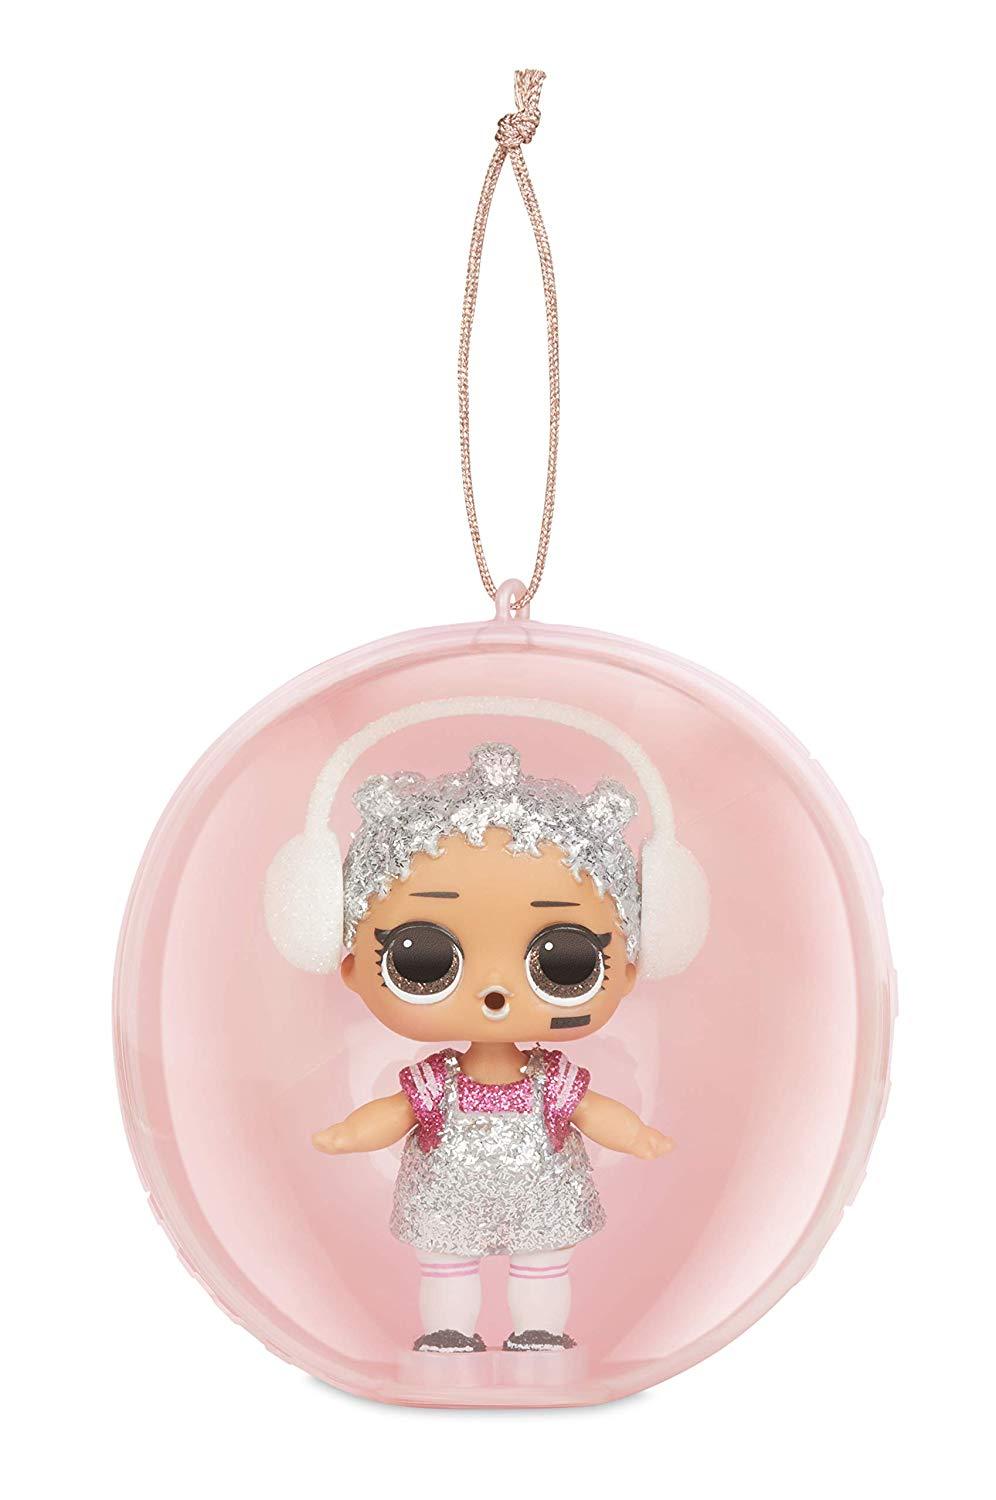 L.O.L. Surprise! Dolls Bling Series 3-1A Brinquedo Anne Claire Baby Store 